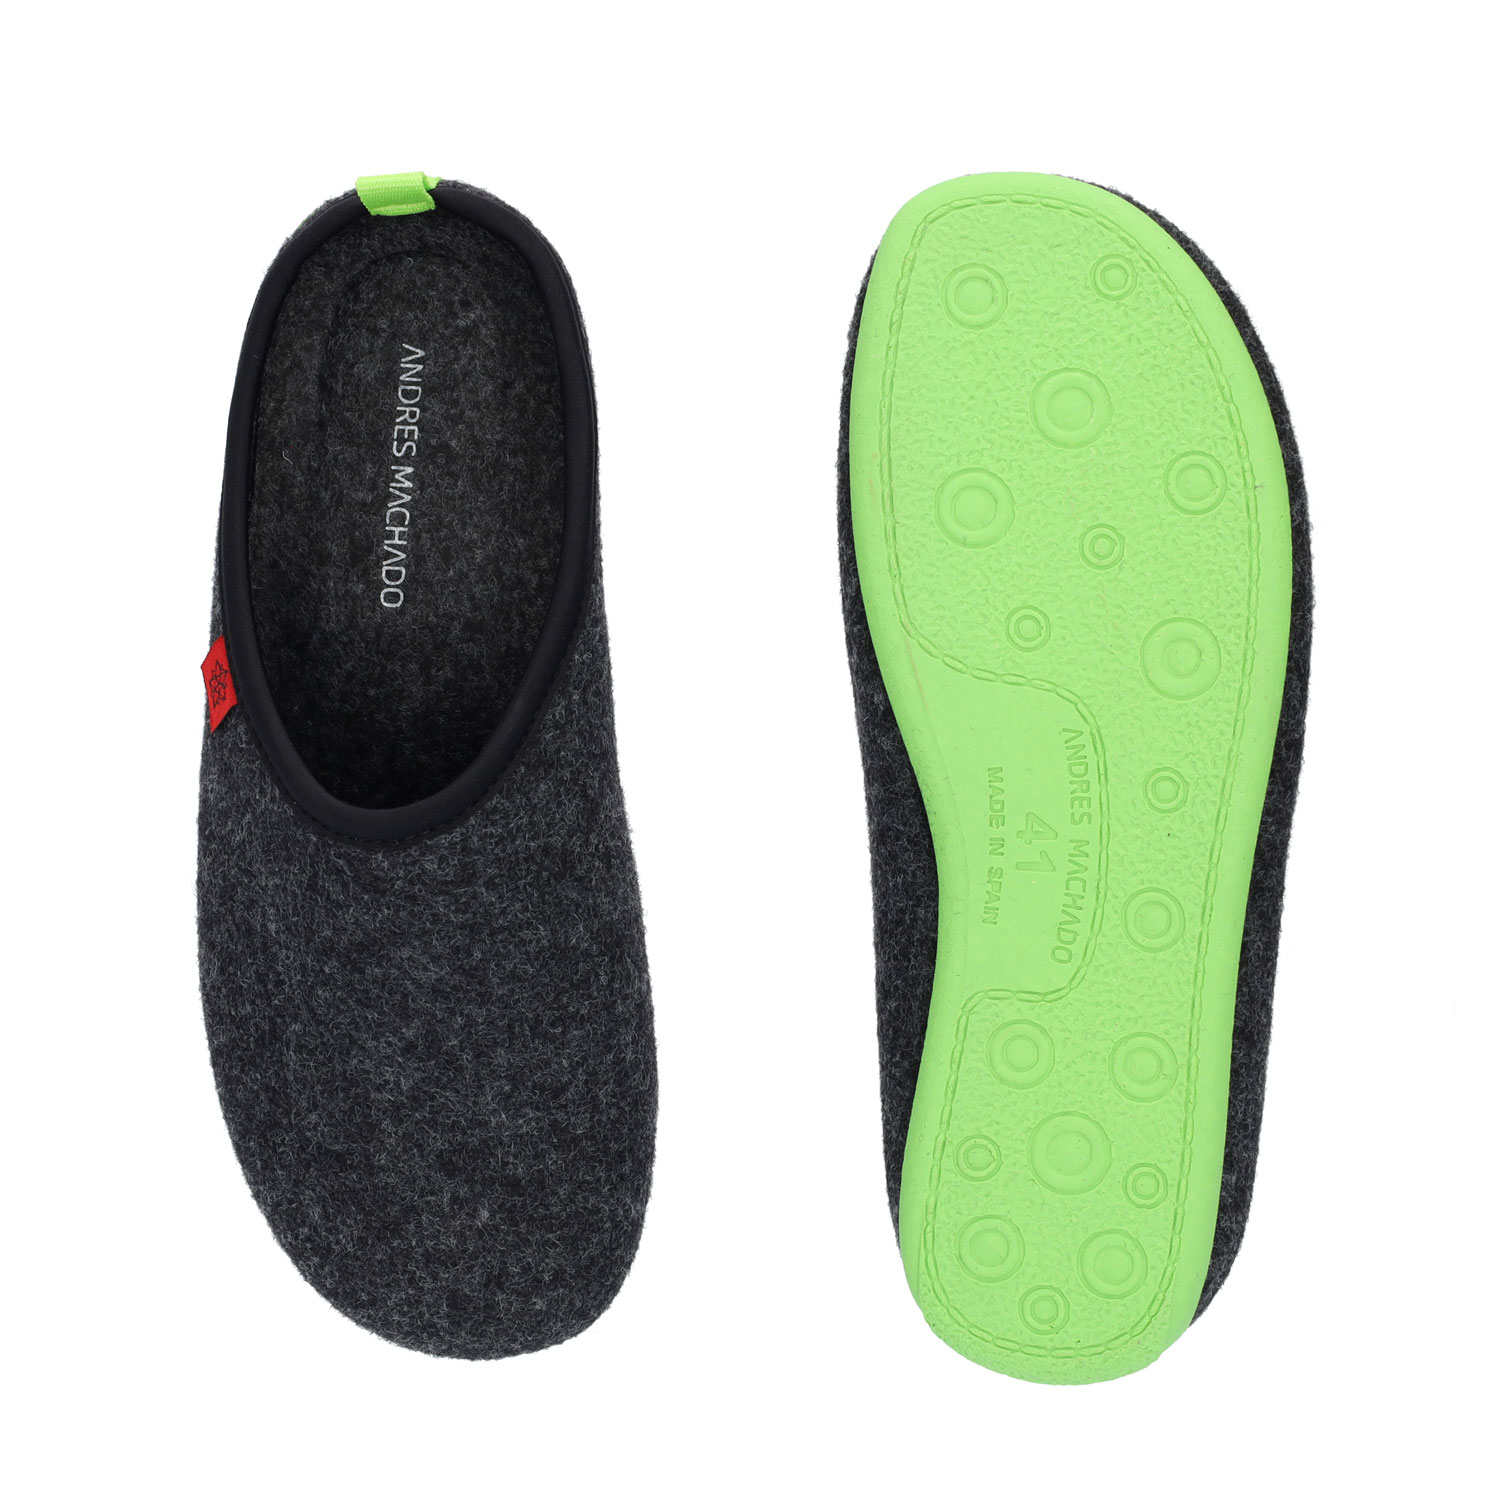 Unisex Black Felt Slippers with Green sole 